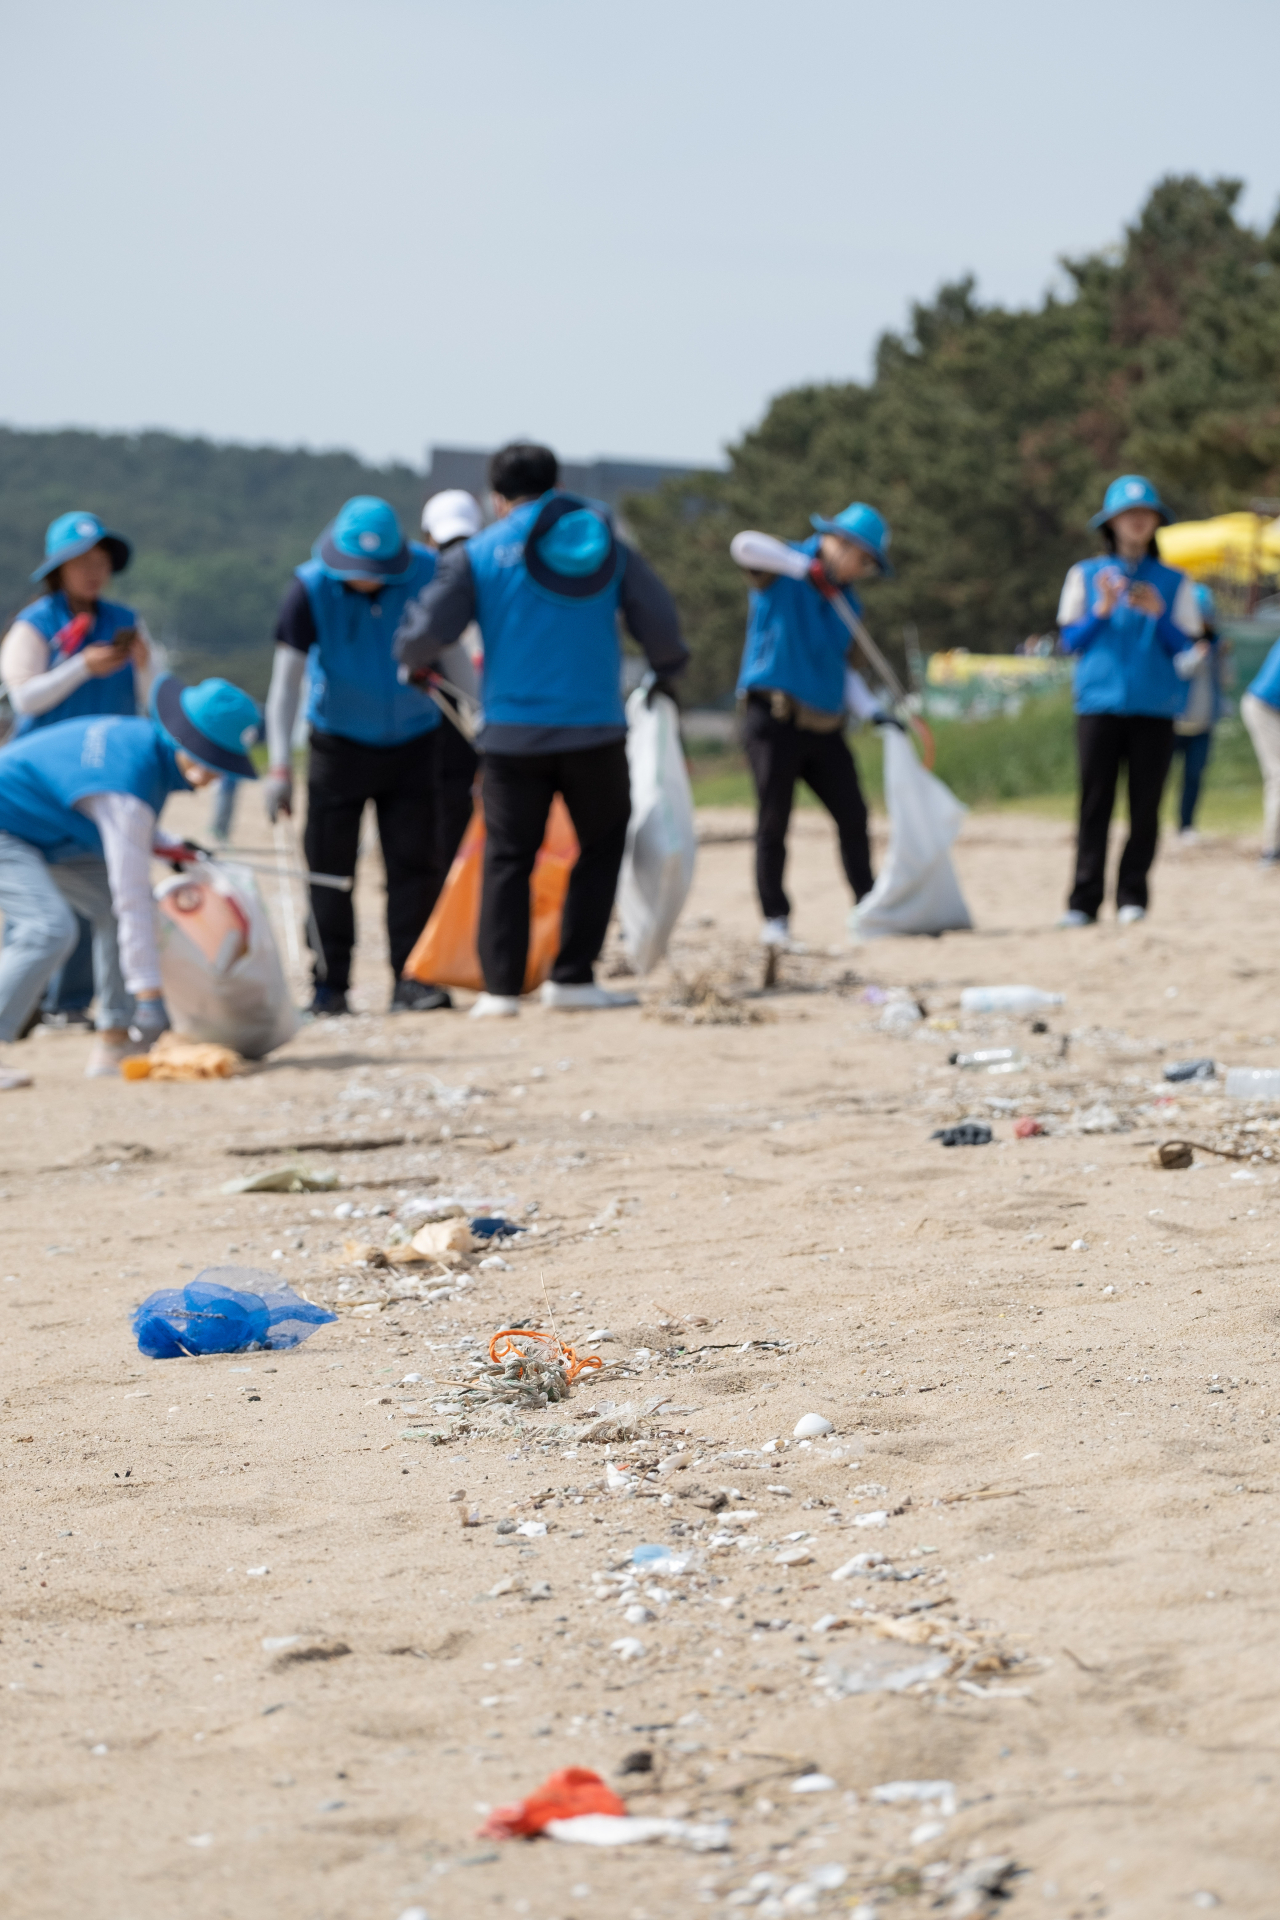 Ploggers pick up litter from the beach in Incheon. (Ita Seoul)